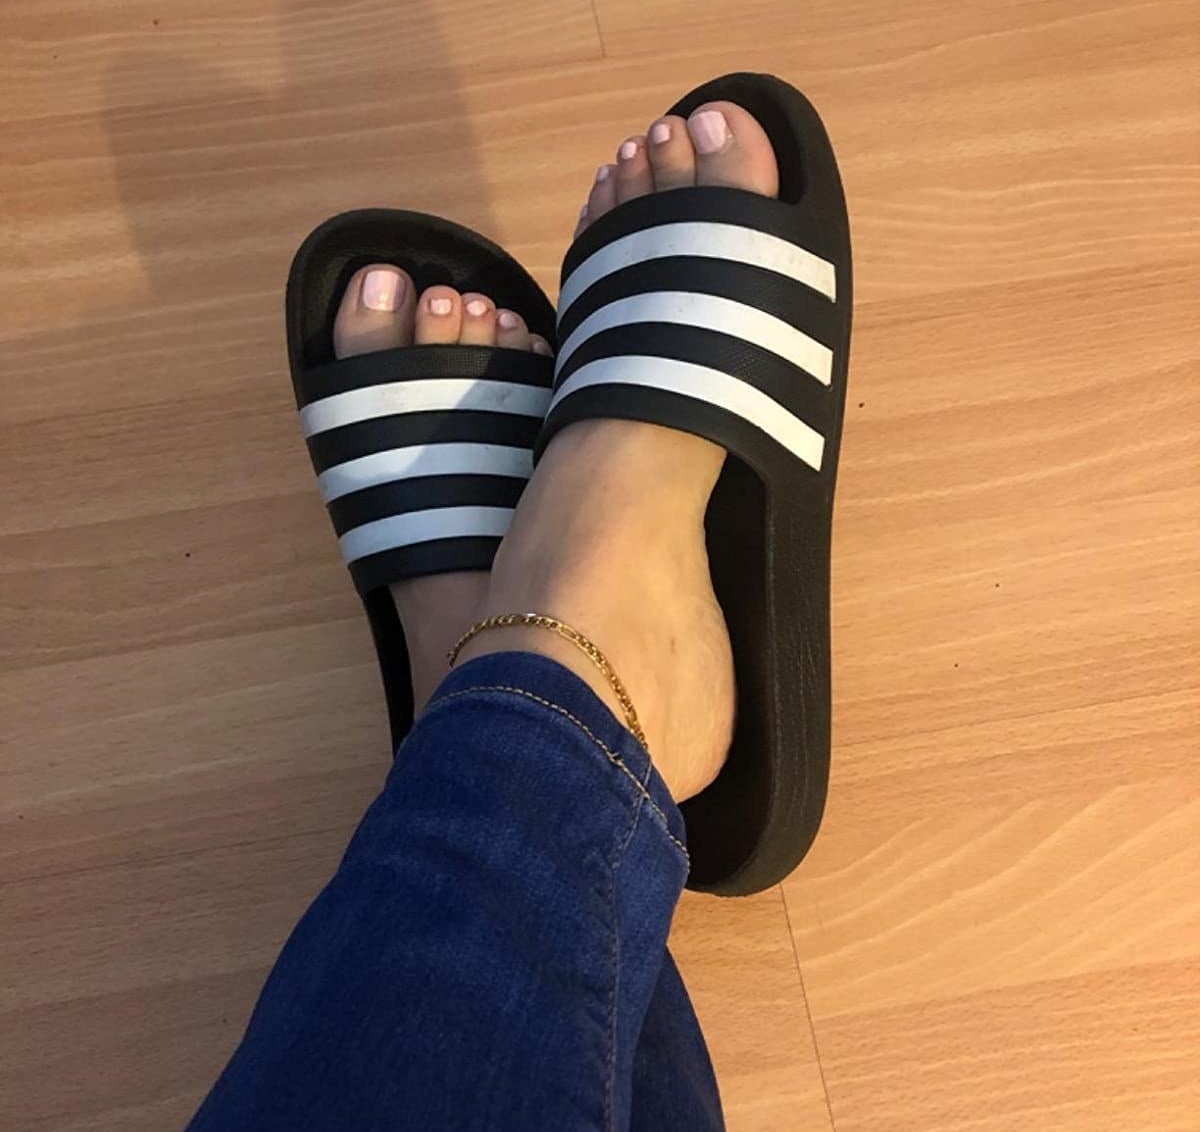 Reviewer black adidas slides with white stripes on the front foot panel